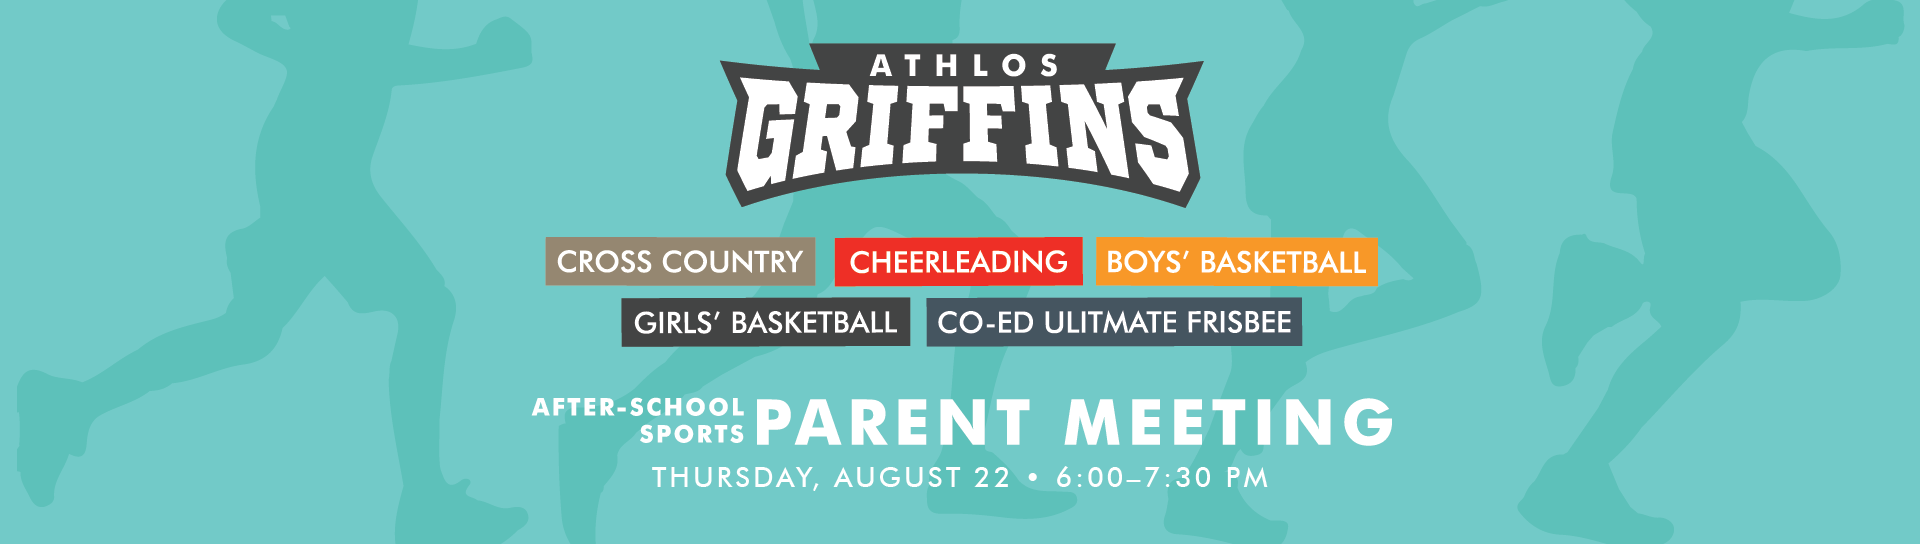 after-school sports parent meeting - august 22